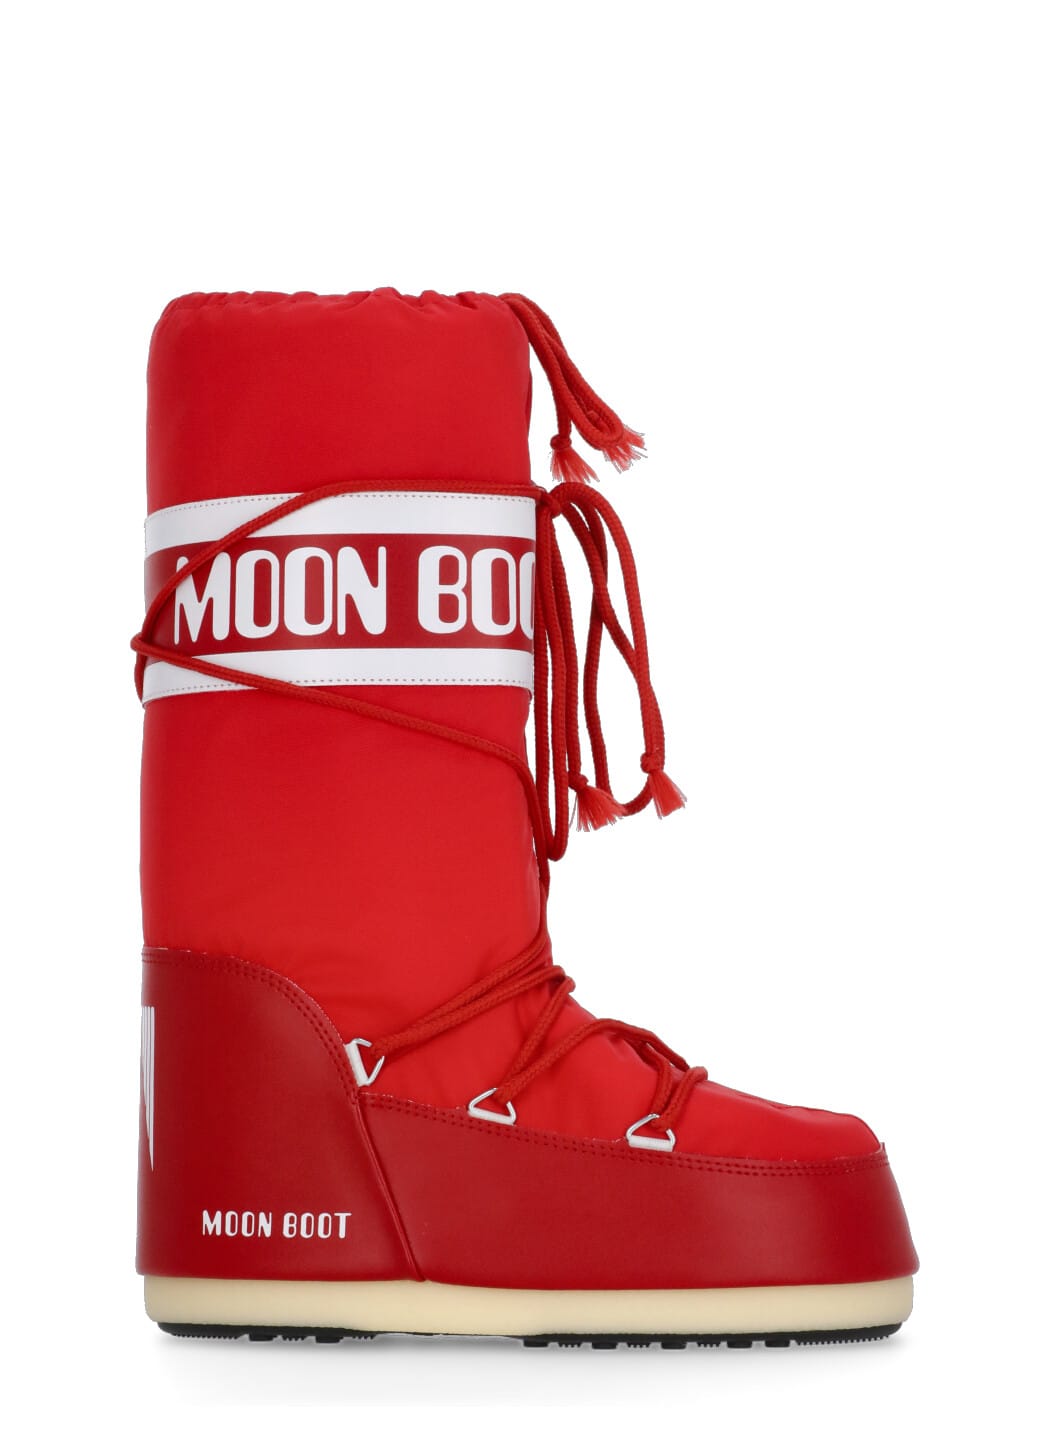 MOON BOOT ICON BOOTS